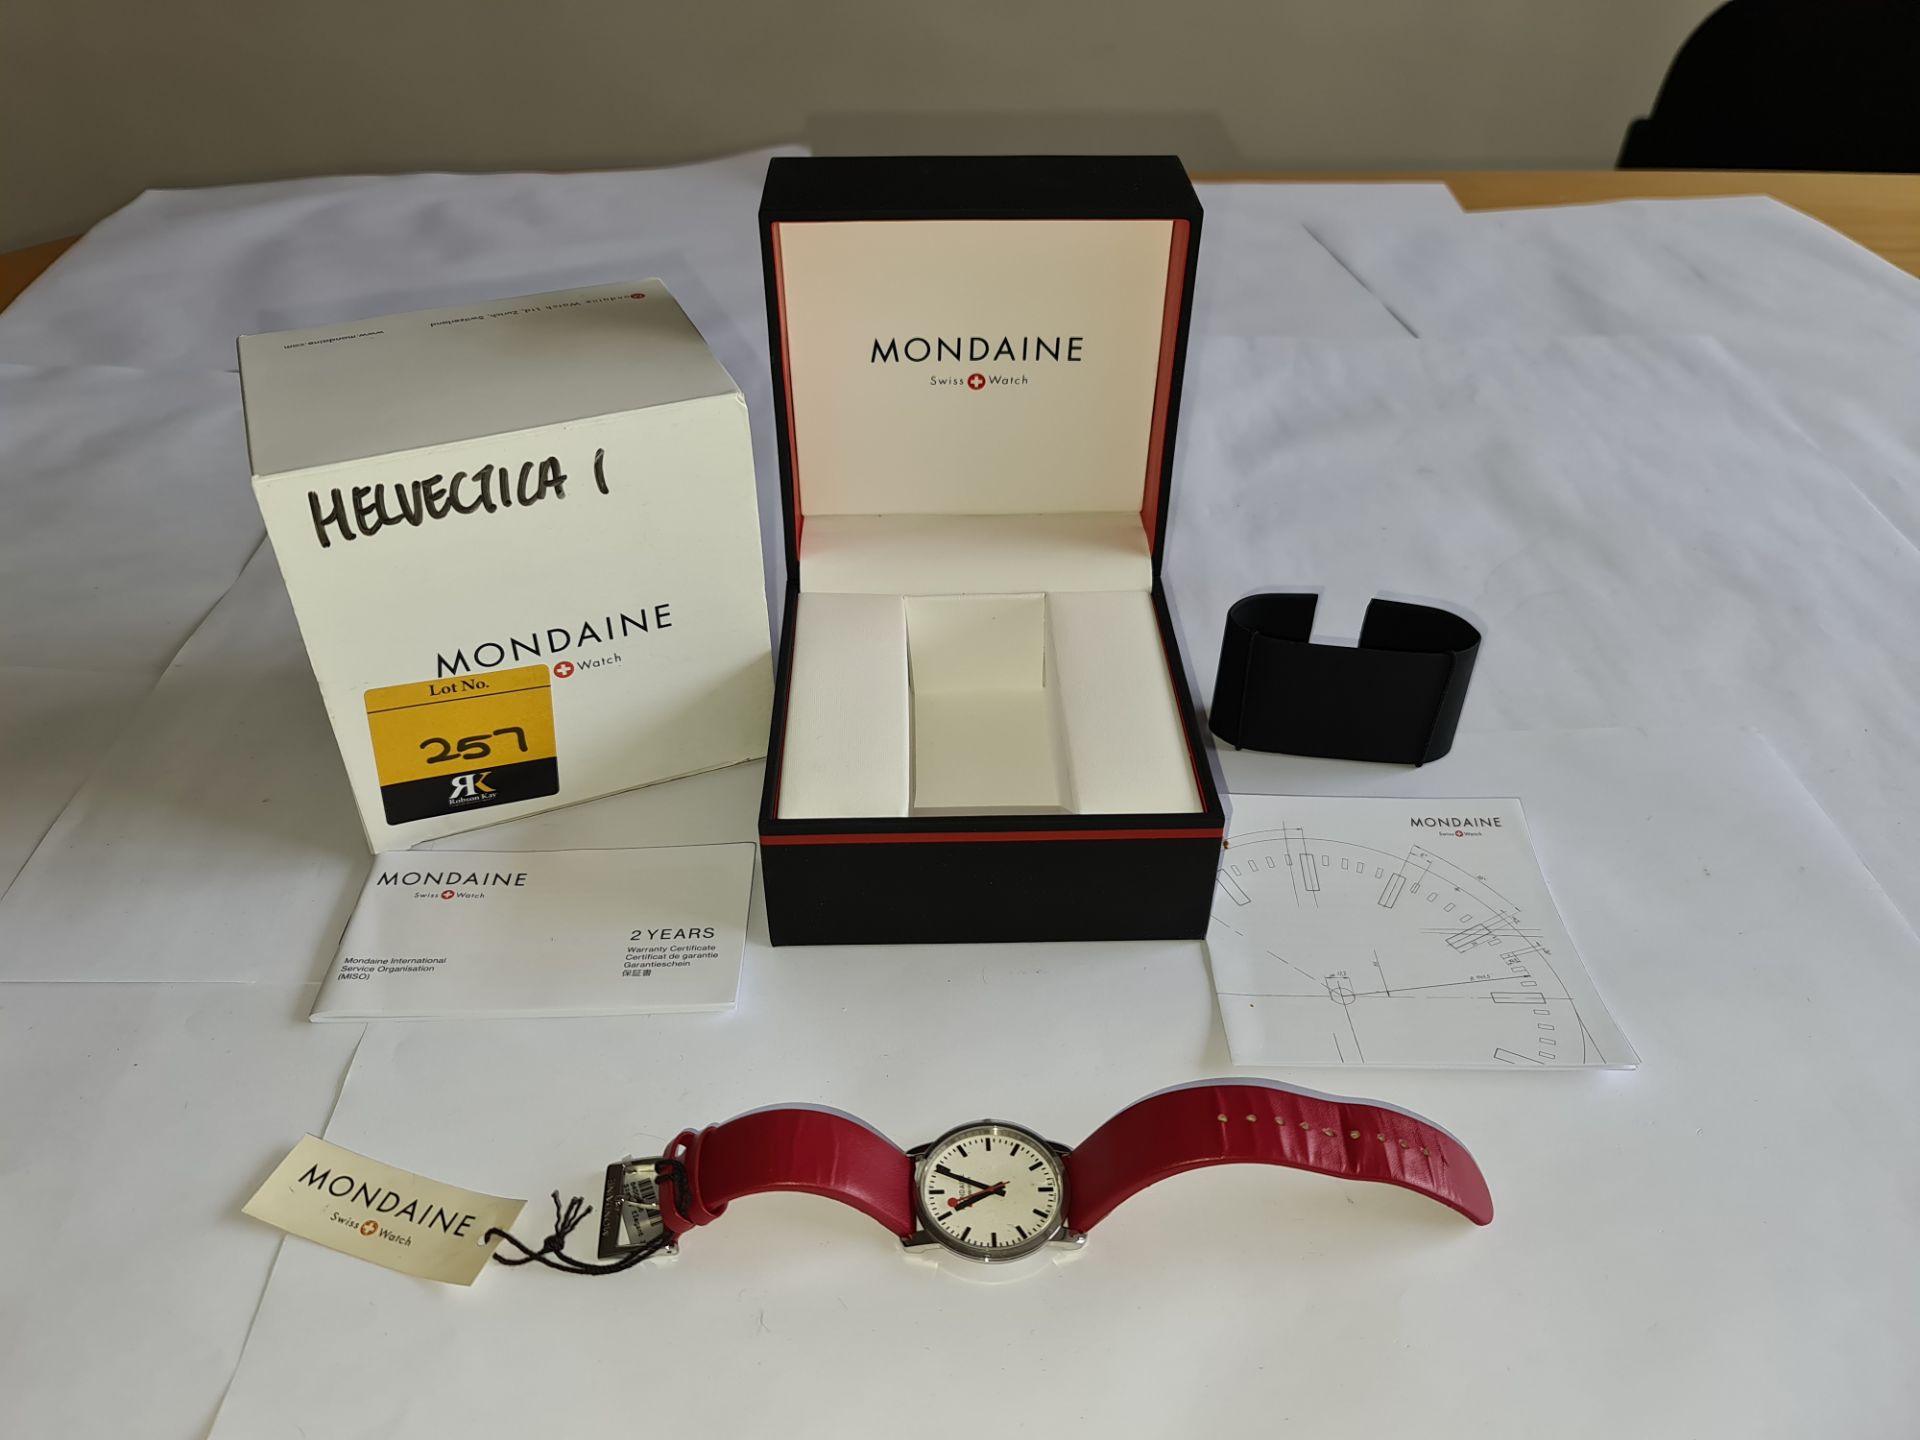 Mondaine watch on leather strap, product code A400.30351.11SBC. RRP £285. Sapphire Crystal, Stainles